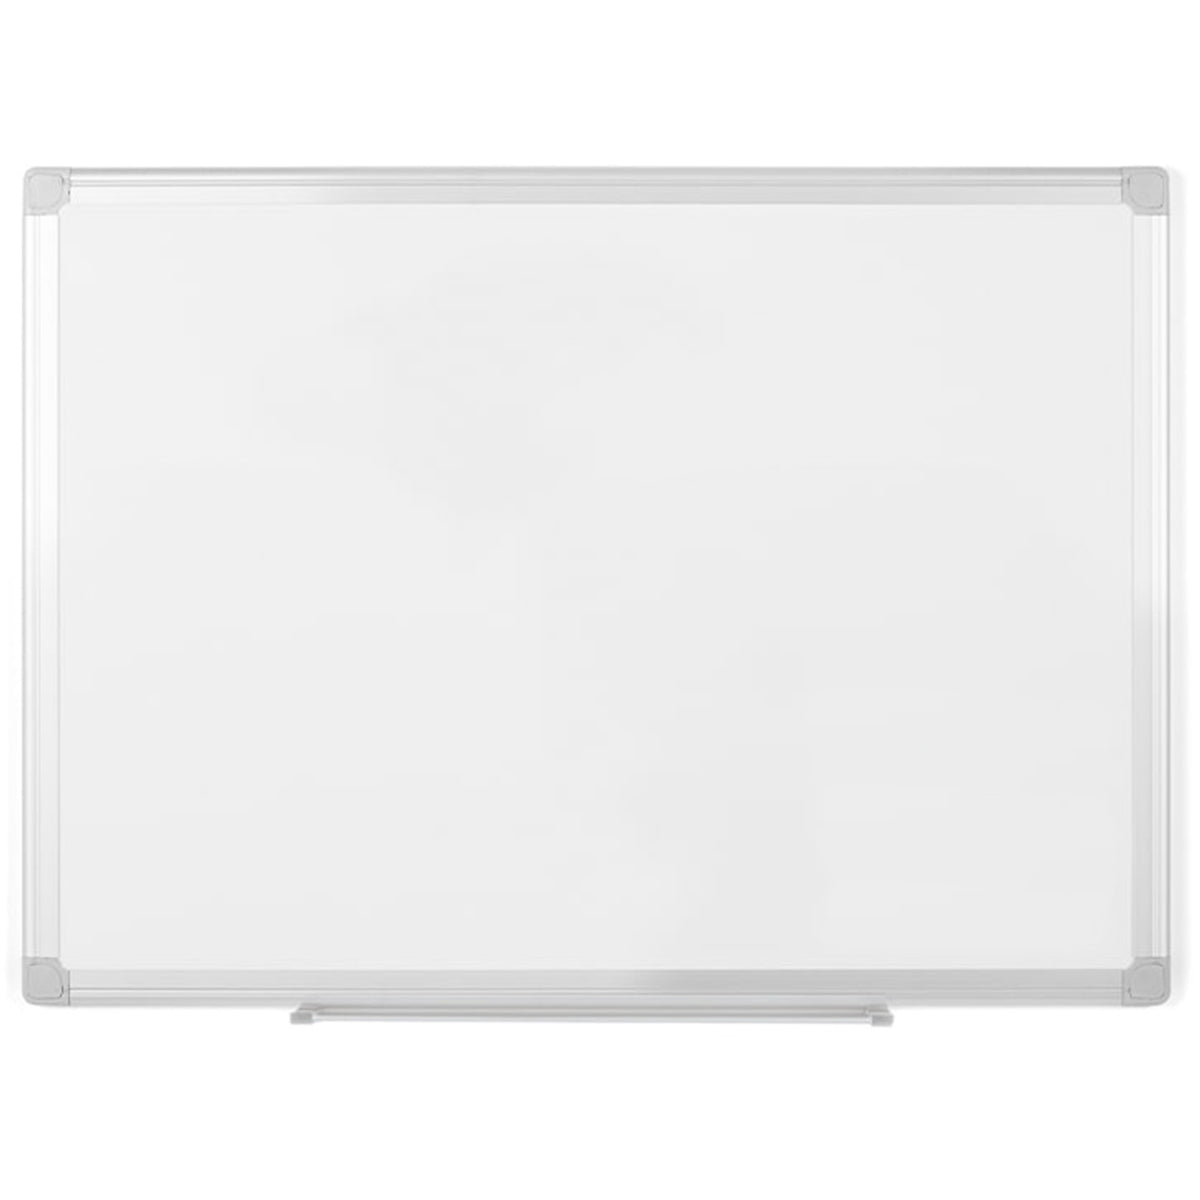 MA0507790 Earth Series Magnetic Laquered Steel Dry Erase Board, 100% Recycled Frame, Snap-On Marker Tray, 36" x 48", Aluminum Frame by MasterVision